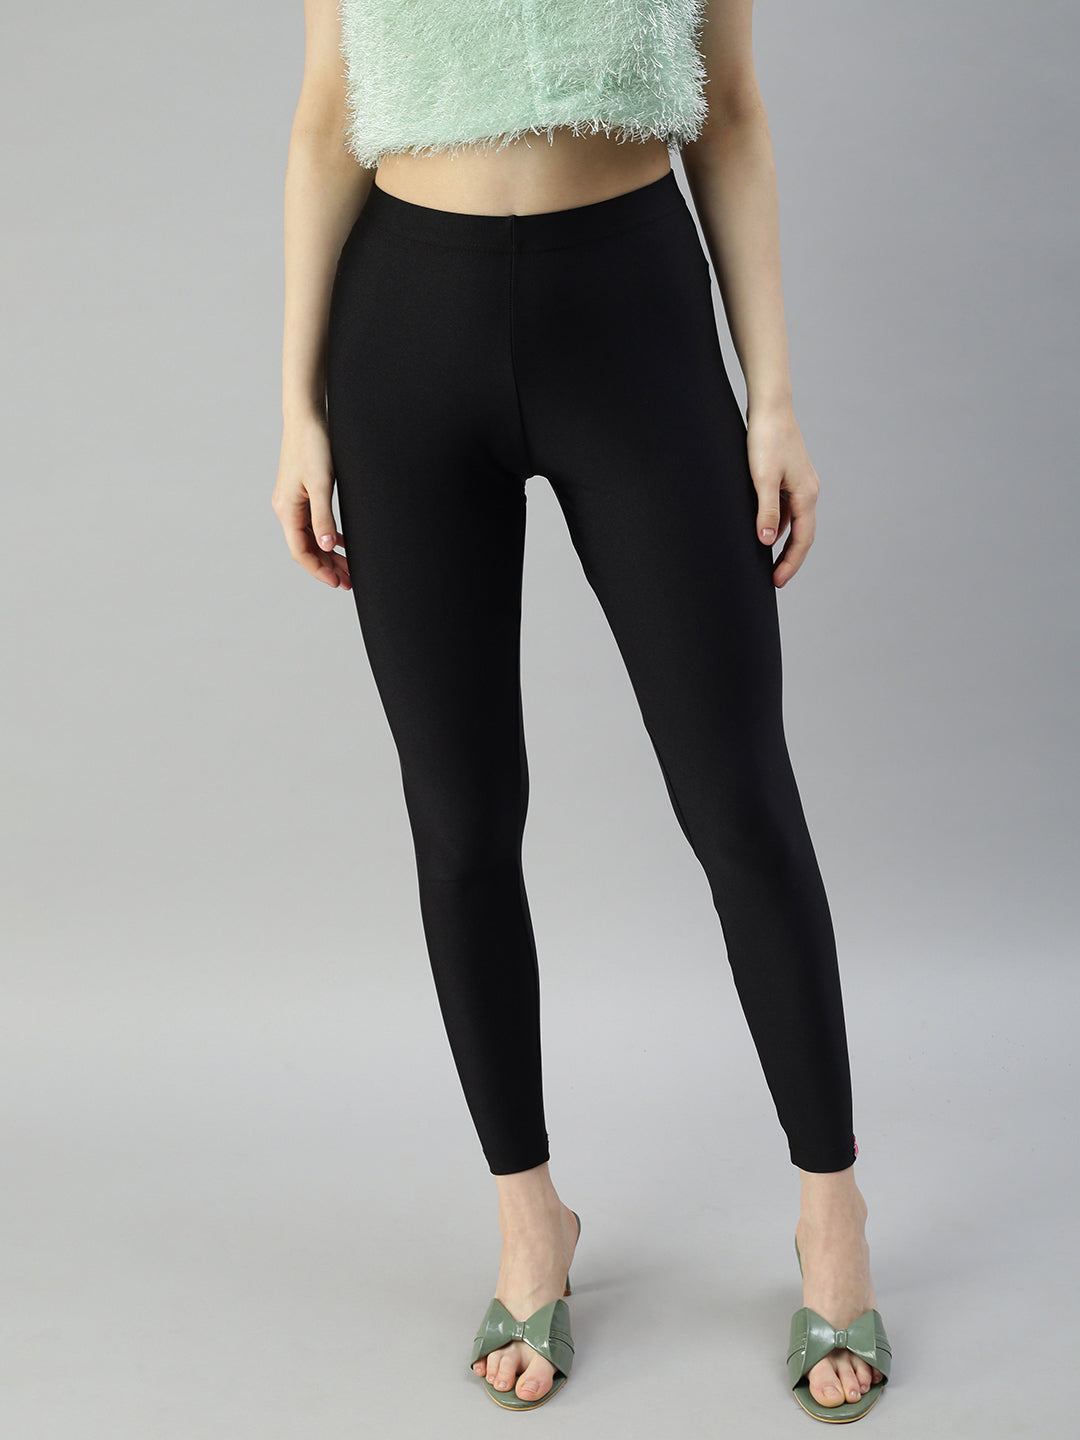 Ankle Length Leggings In Faridabad - Prices, Manufacturers & Suppliers